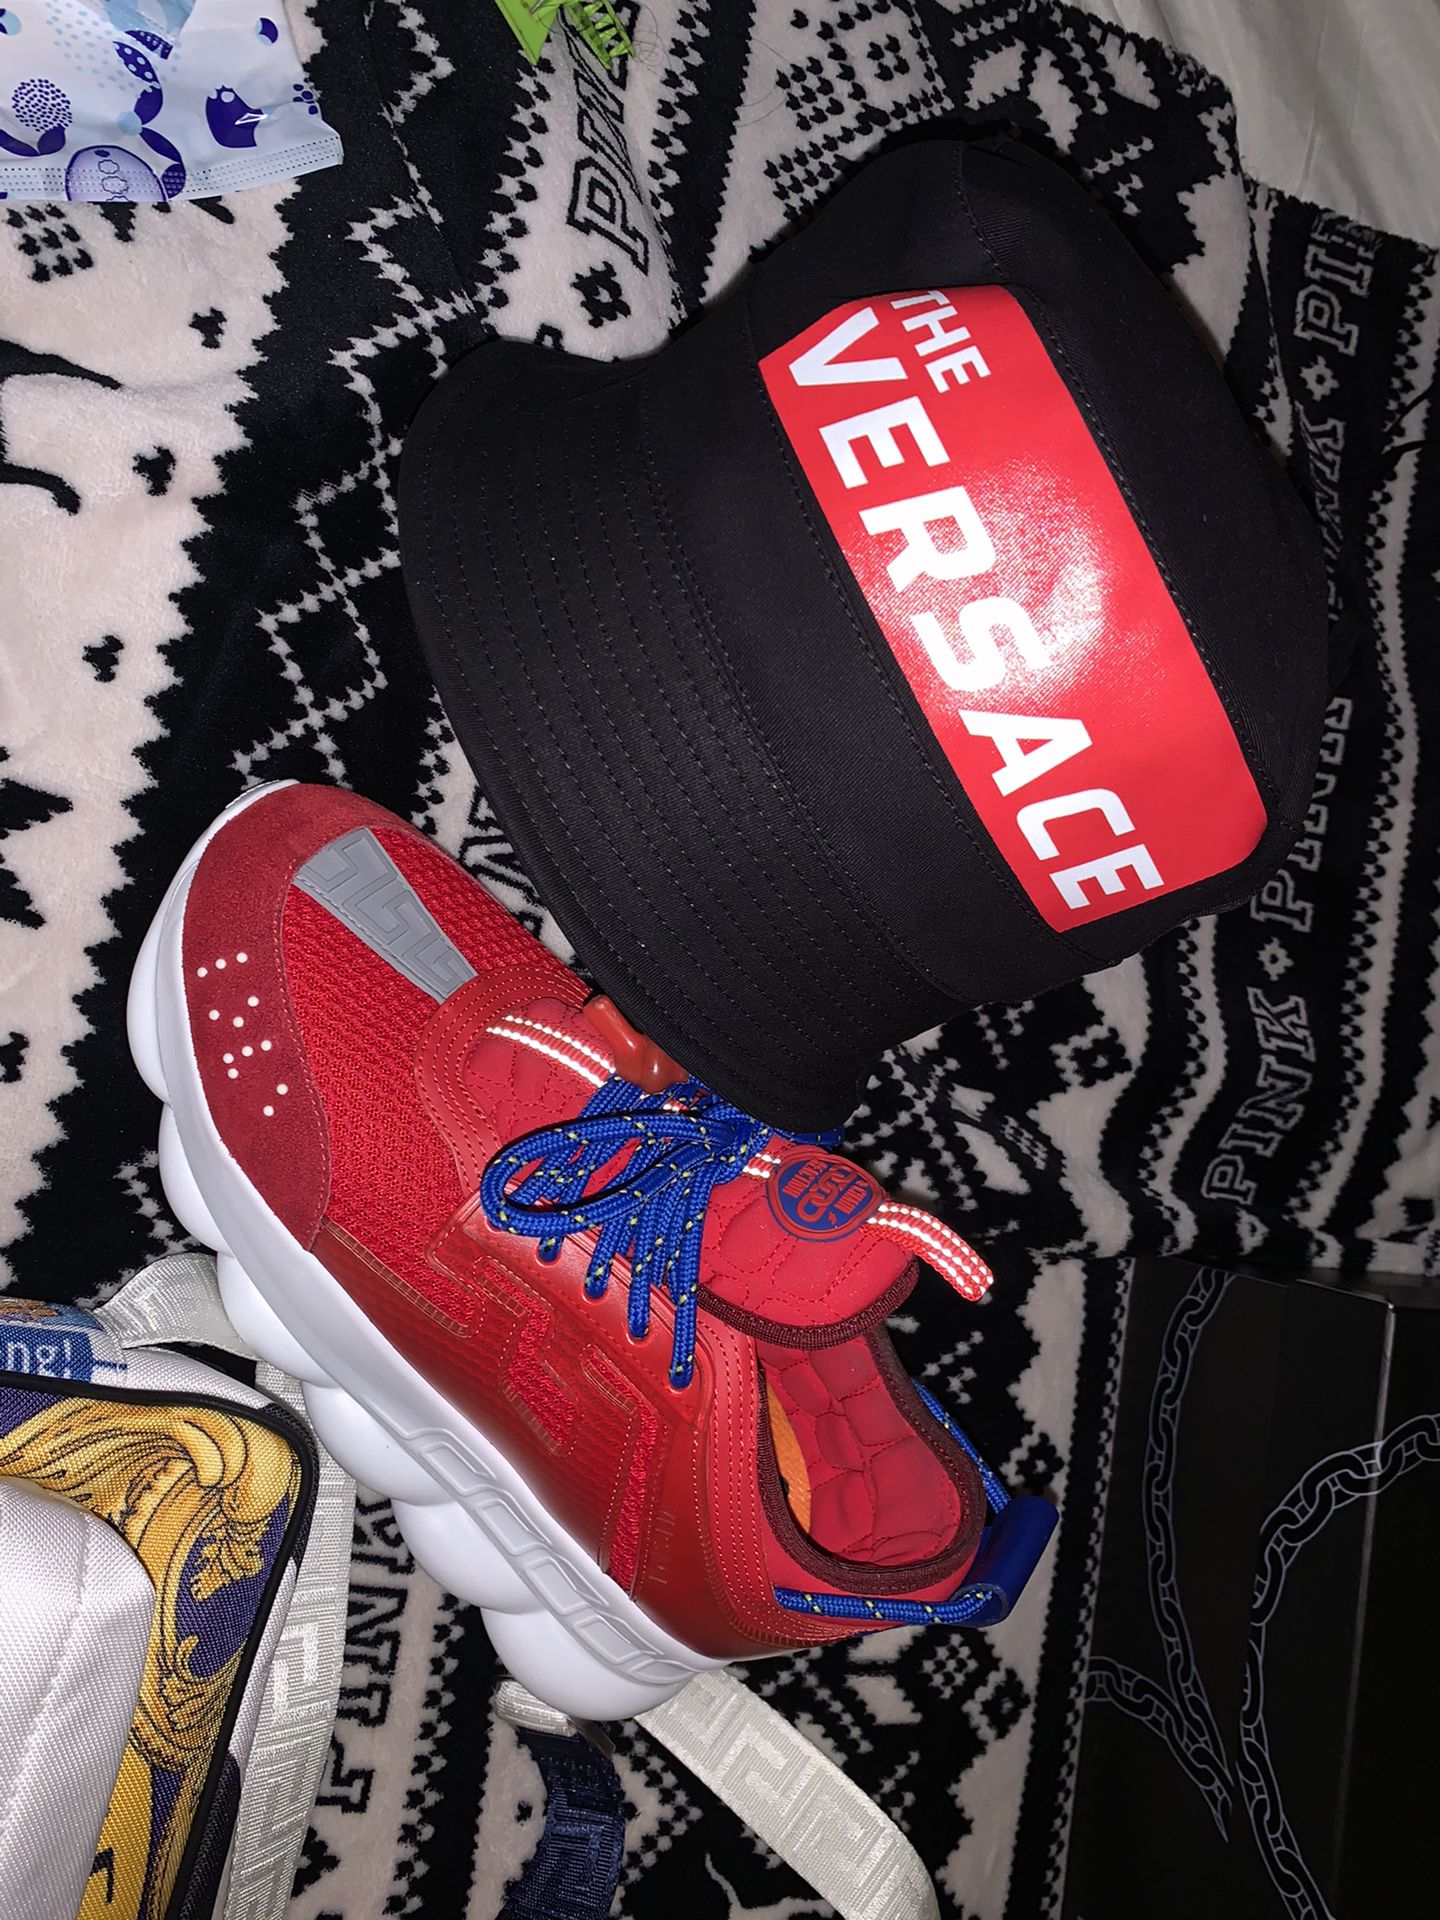 Versace chain reaction Sneaker Only! Bag And Bucket Hat Sold Excellent Condition 